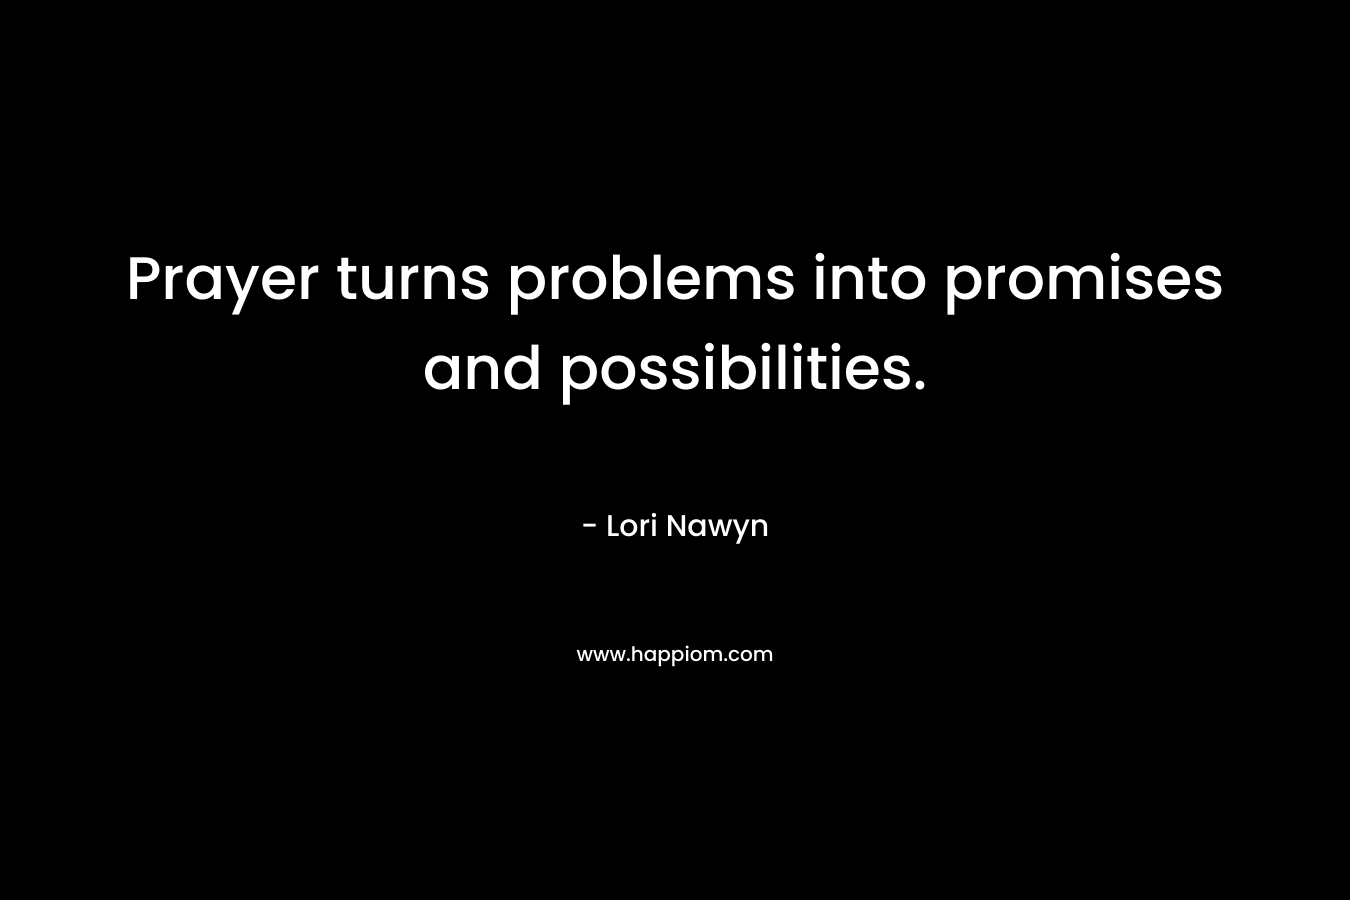 Prayer turns problems into promises and possibilities.